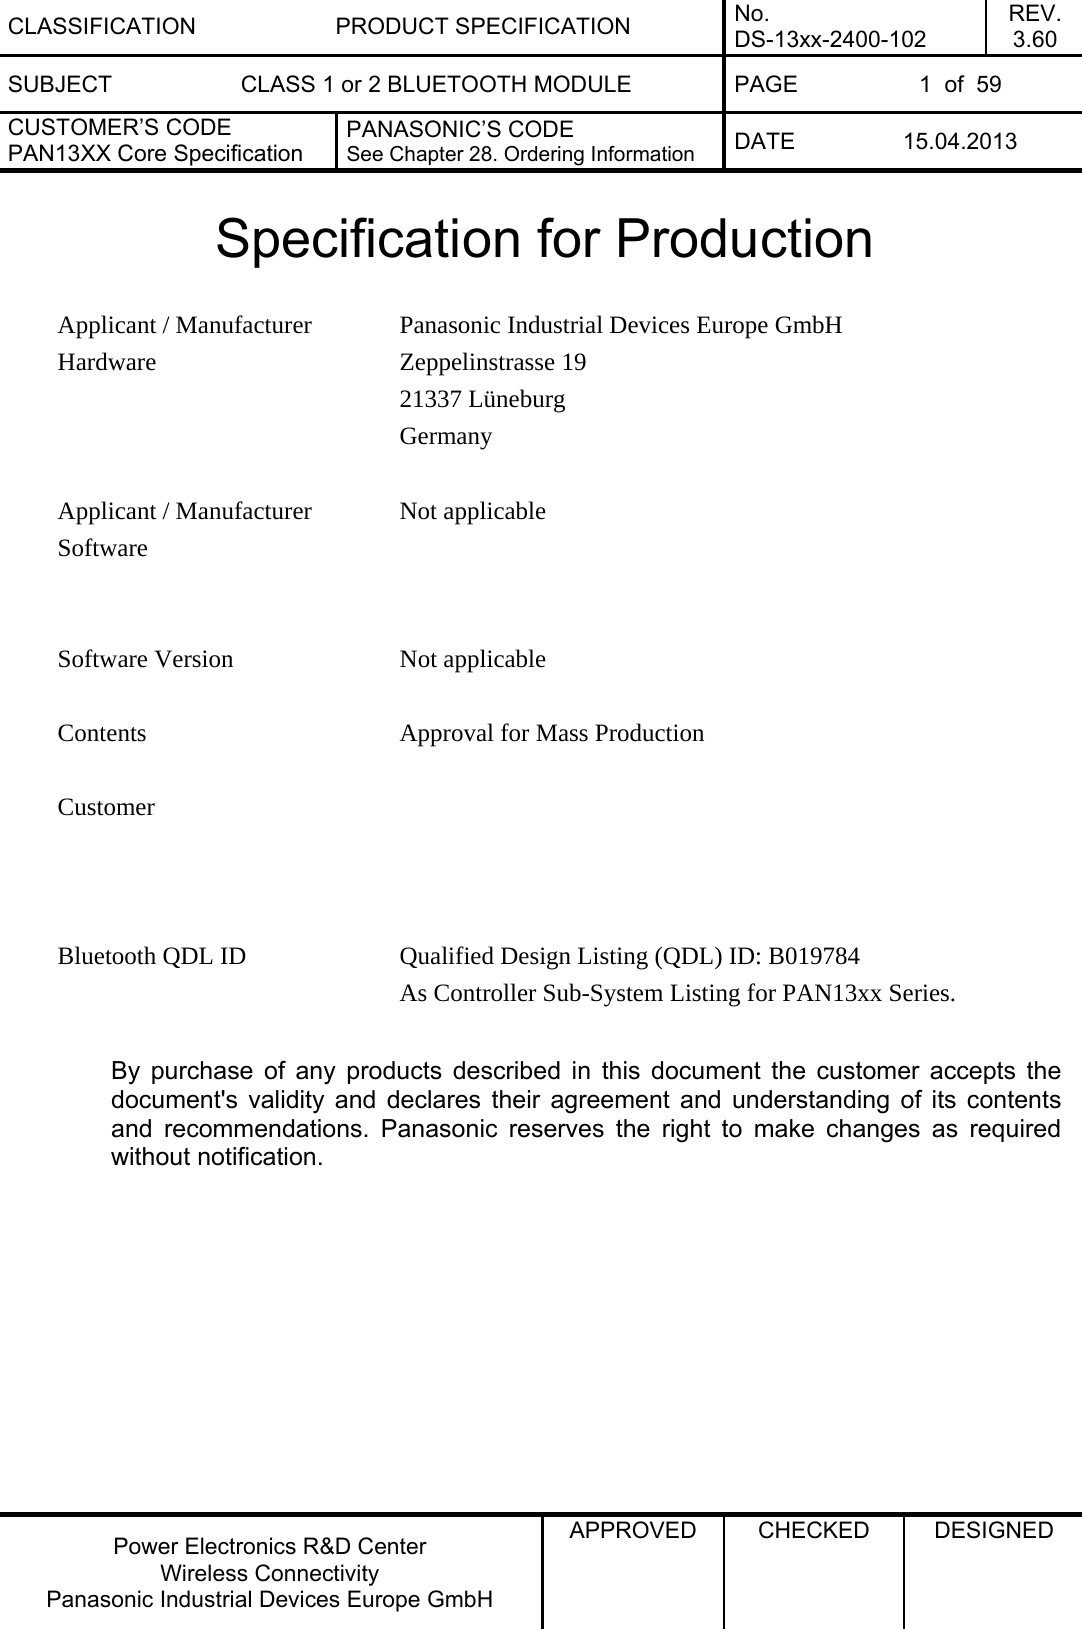 CLASSIFICATION PRODUCT SPECIFICATION No. DS-13xx-2400-102 REV. 3.60 SUBJECT  CLASS 1 or 2 BLUETOOTH MODULE  PAGE  1  of  59 CUSTOMER’S CODE PAN13XX Core Specification PANASONIC’S CODE See Chapter 28. Ordering Information  DATE 15.04.2013   Power Electronics R&amp;D Center Wireless Connectivity Panasonic Industrial Devices Europe GmbH APPROVED  CHECKED  DESIGNED   Specification for Production  Panasonic Industrial Devices Europe GmbH Zeppelinstrasse 19 21337 Lüneburg Applicant / Manufacturer Hardware Germany   Not applicable   Applicant / Manufacturer Software  Software Version  Not applicable   Contents  Approval for Mass Production      Customer  Bluetooth QDL ID  Qualified Design Listing (QDL) ID: B019784 As Controller Sub-System Listing for PAN13xx Series.  By purchase of any products described in this document the customer accepts the document&apos;s validity and declares their agreement and understanding of its contents and recommendations. Panasonic reserves the right to make changes as required without notification.  